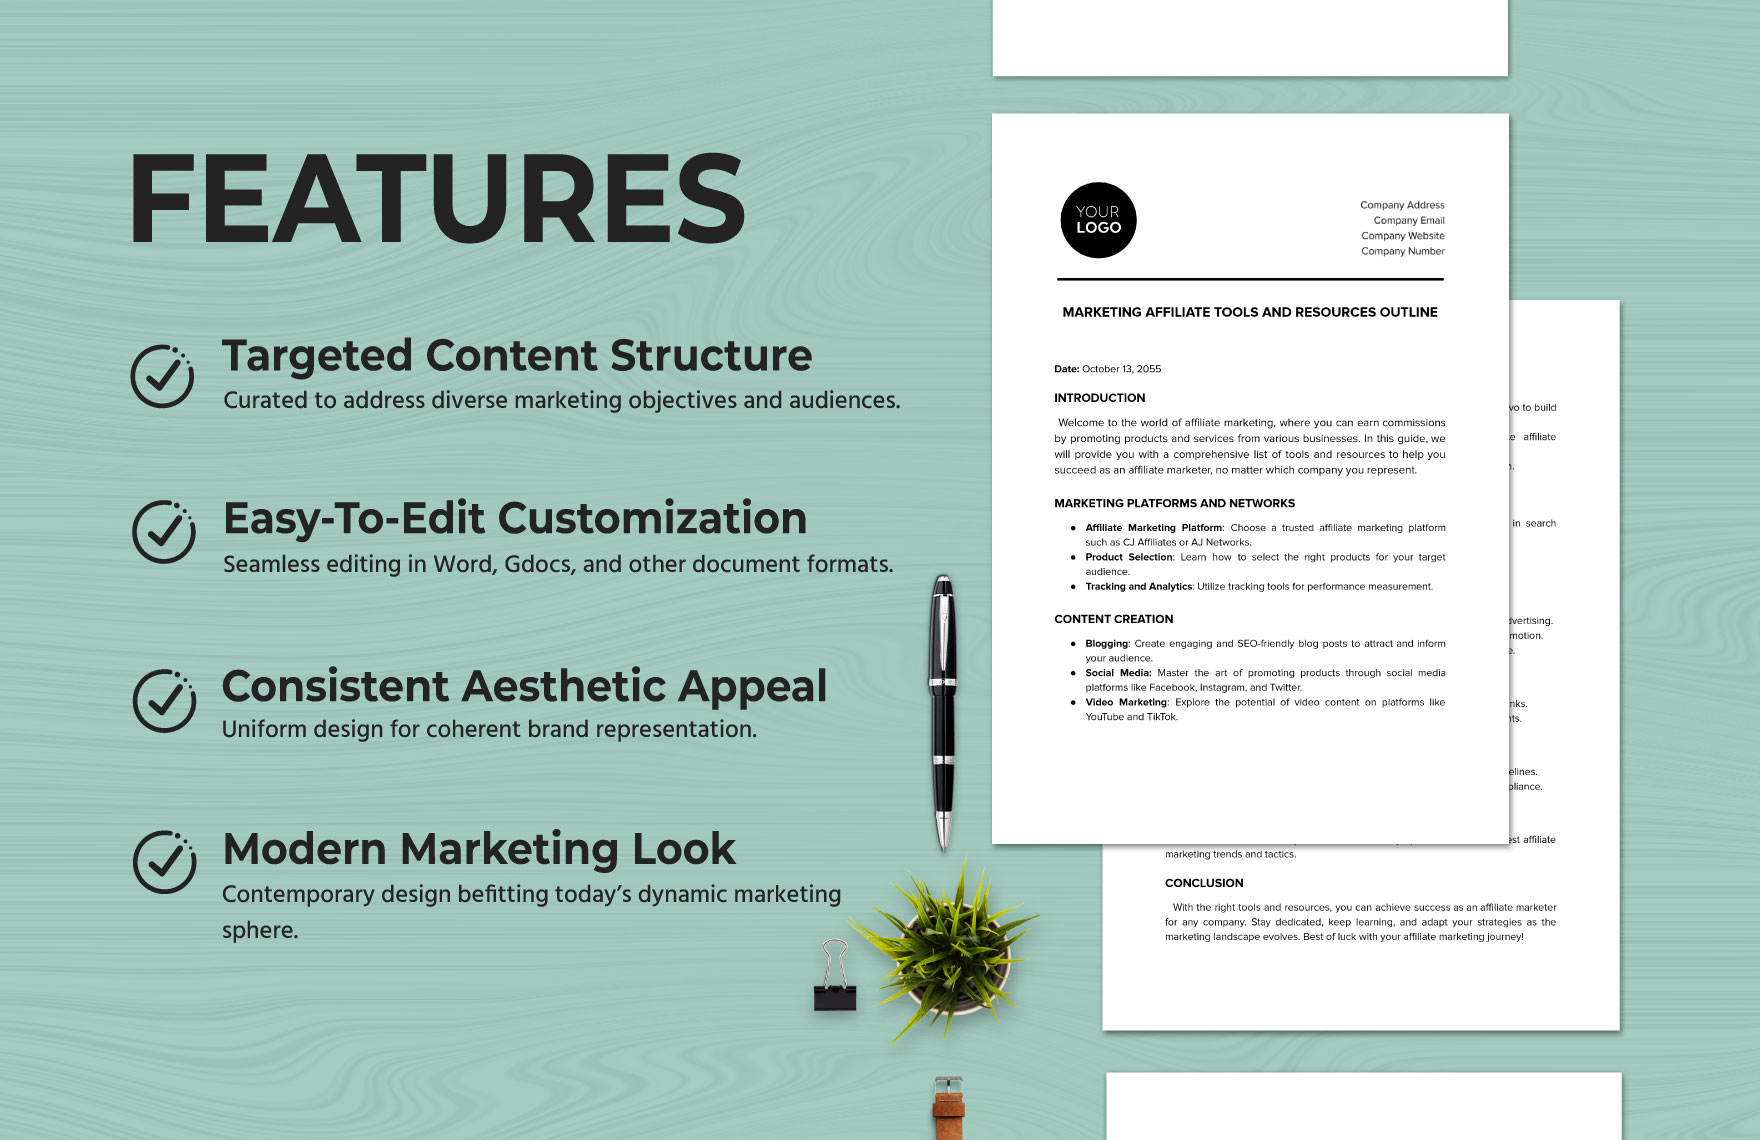 Marketing Affiliate Tools and Resources Outline Template